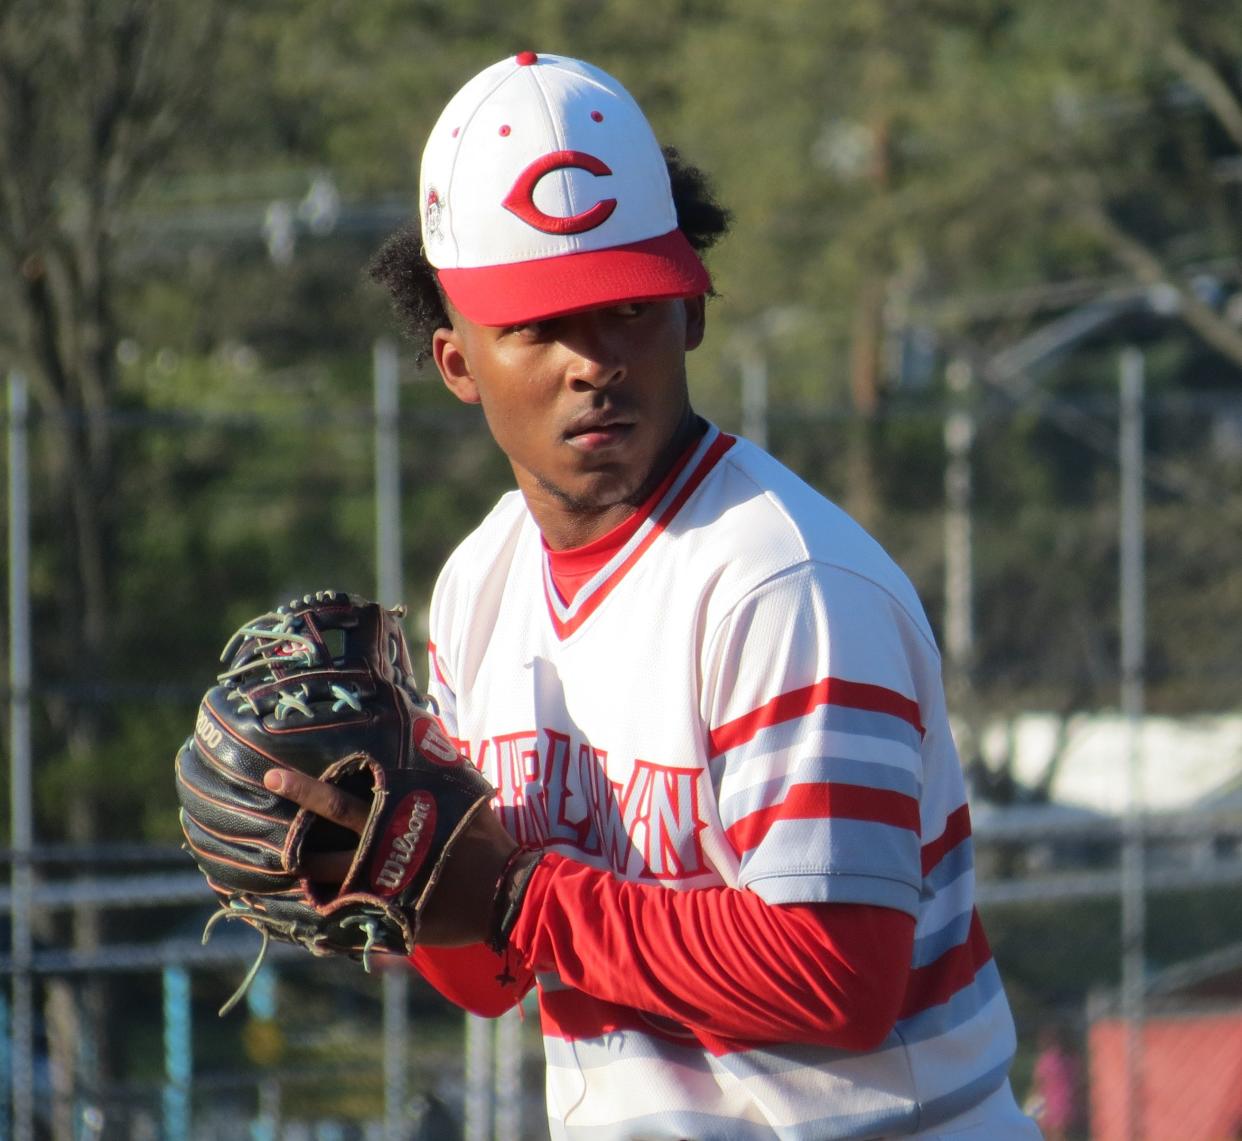 Fair Lawn junior pitcher Alex Cruz says allowing coaches to have contact with catchers via an electronic device during games is "better to move things along."